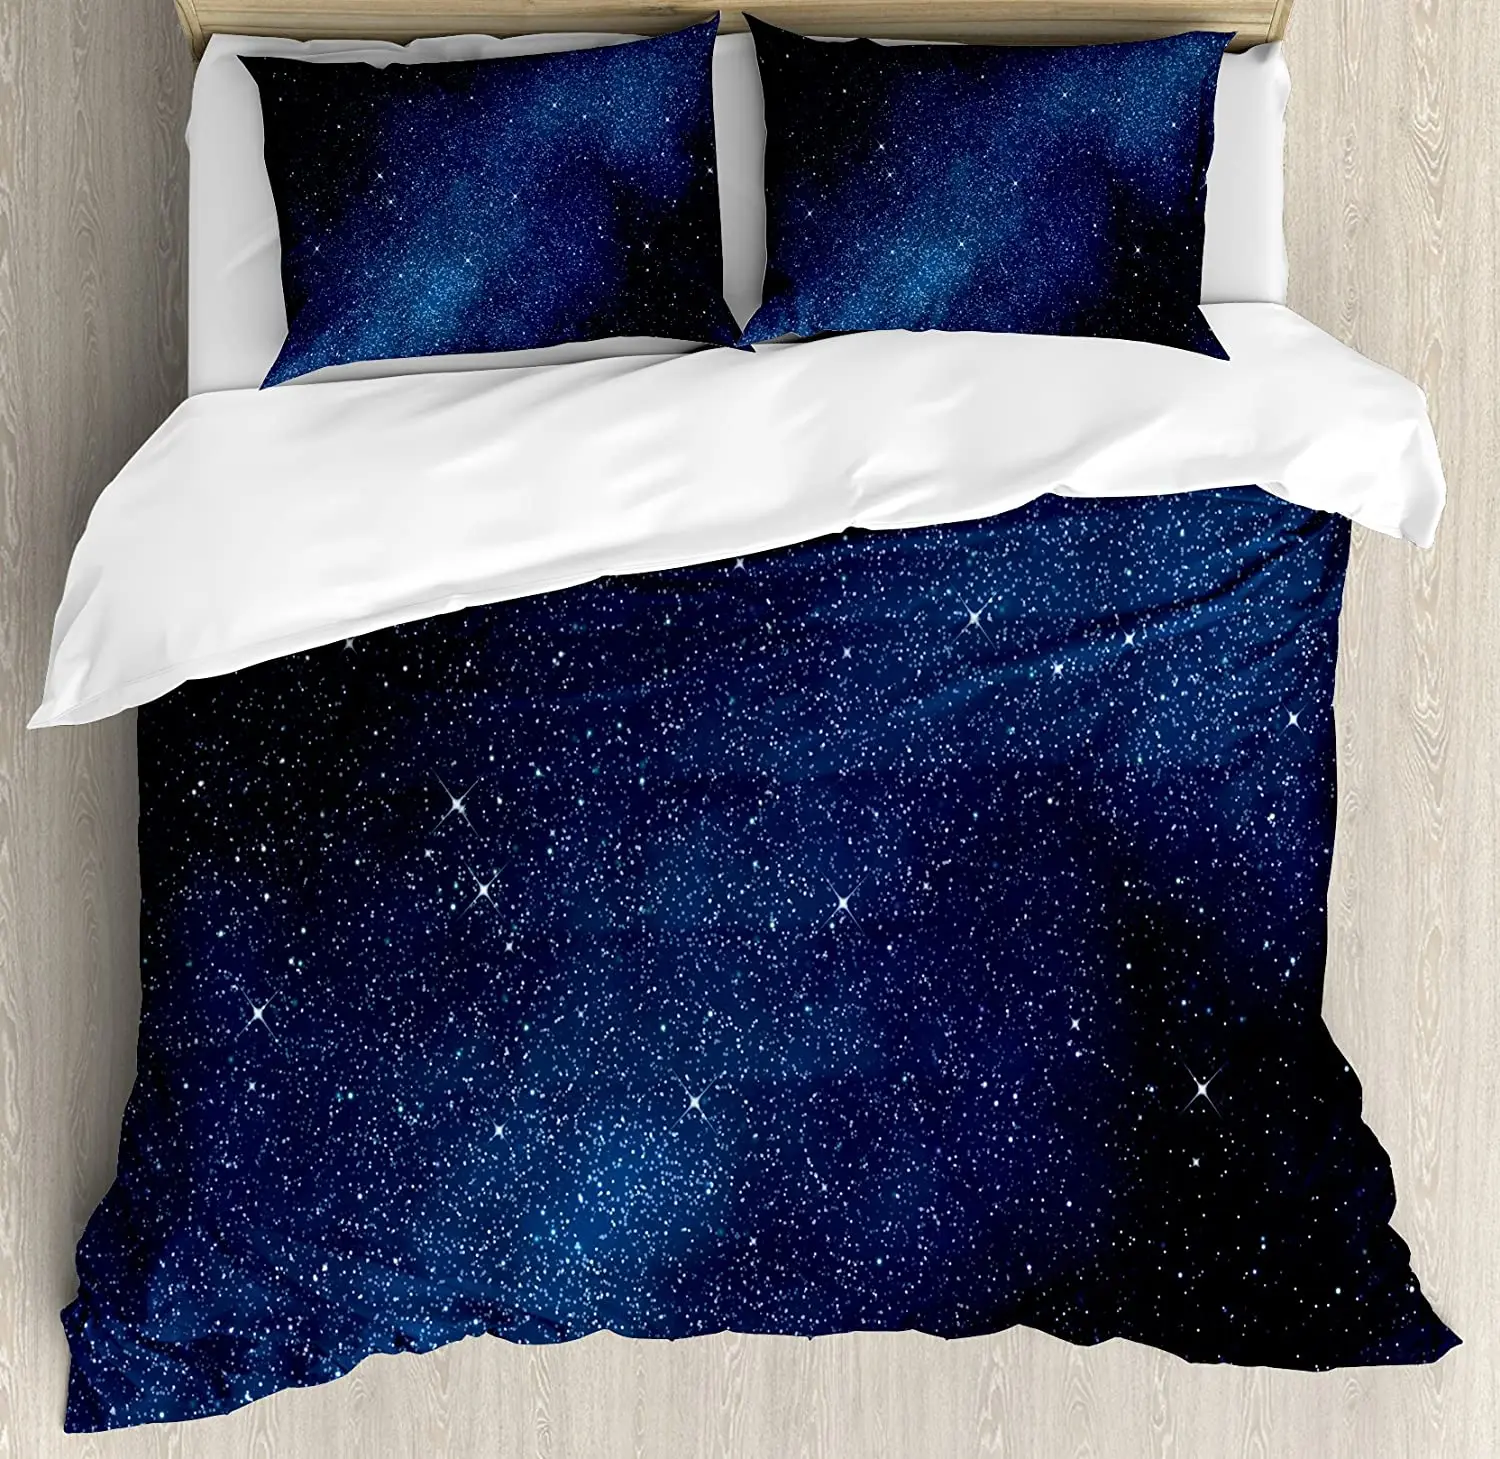 

Night Bedding Set For Bedroom Bed Home Space with Billion Stars Inspiring View Nebula Gala Duvet Cover Quilt Cover Pillowcase